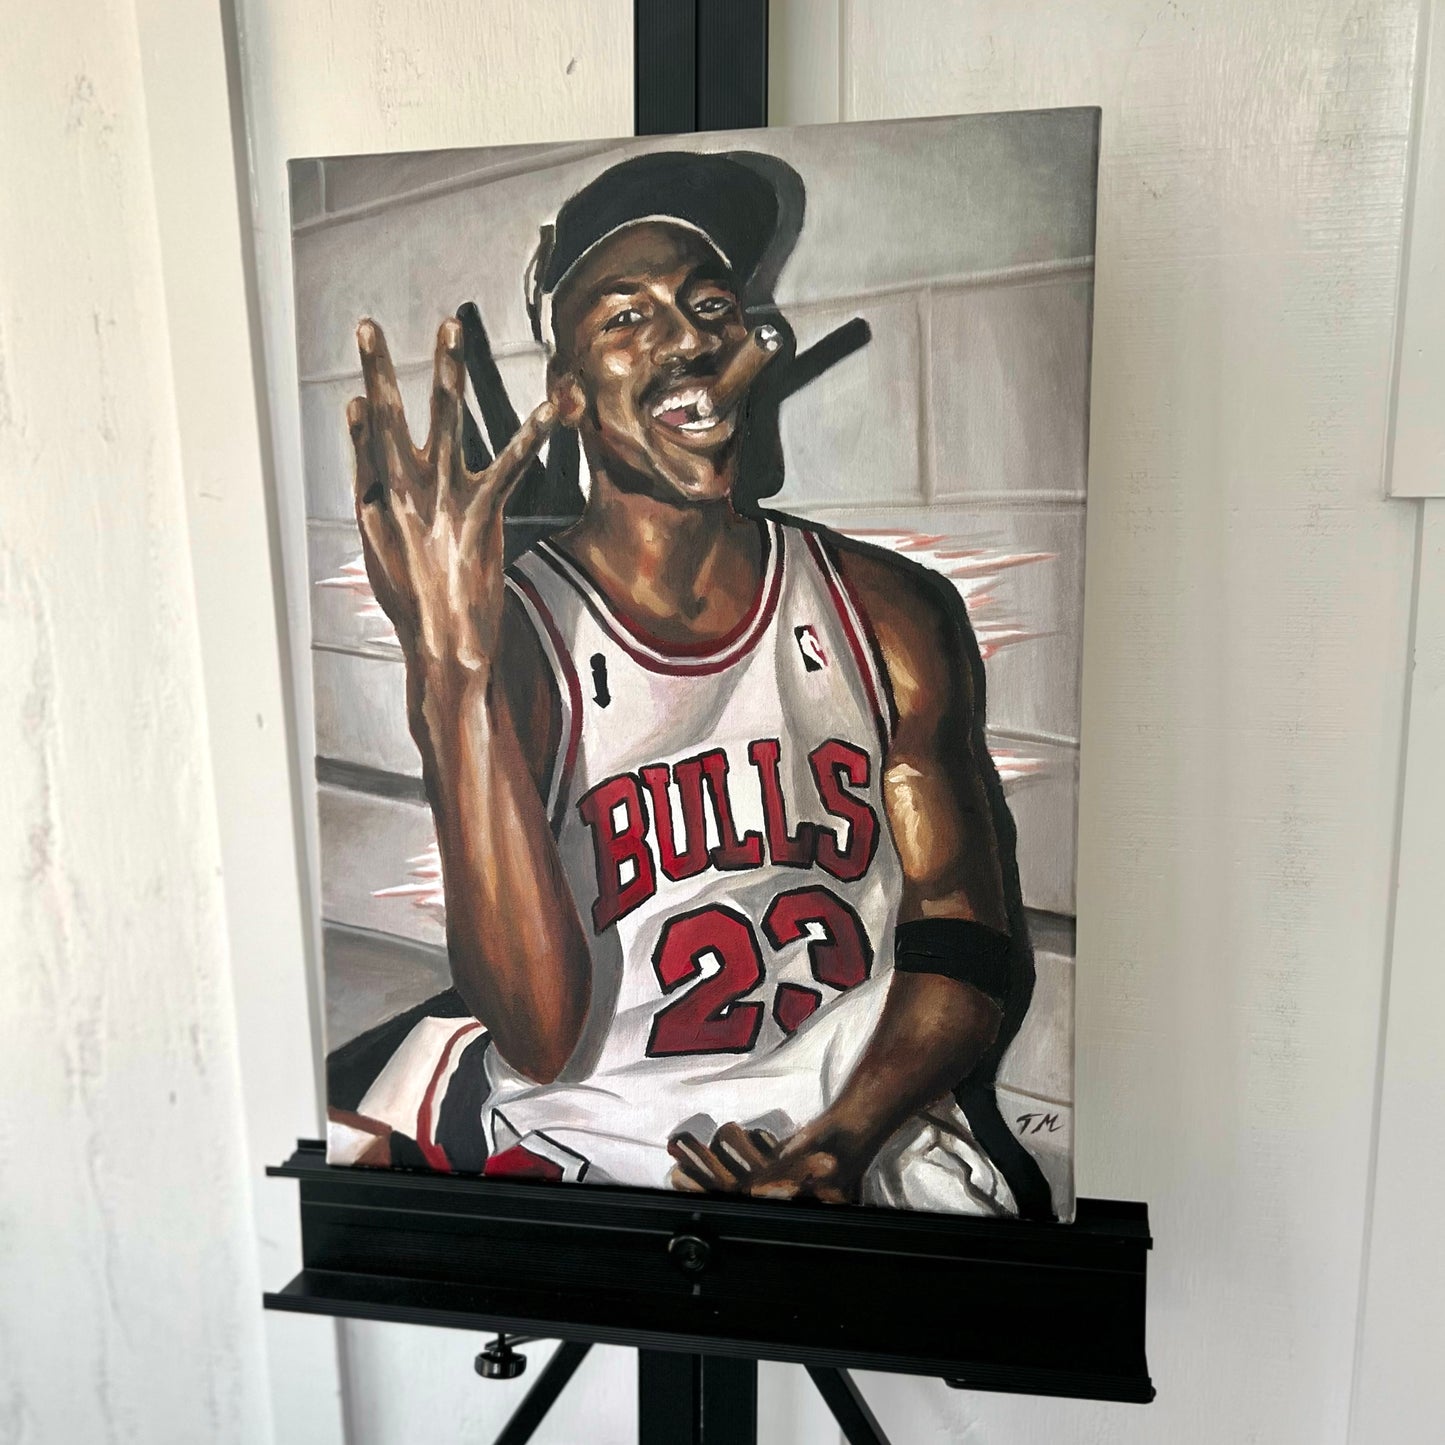 G.O.A.T 2 - Canvas - Tommy Manning Art